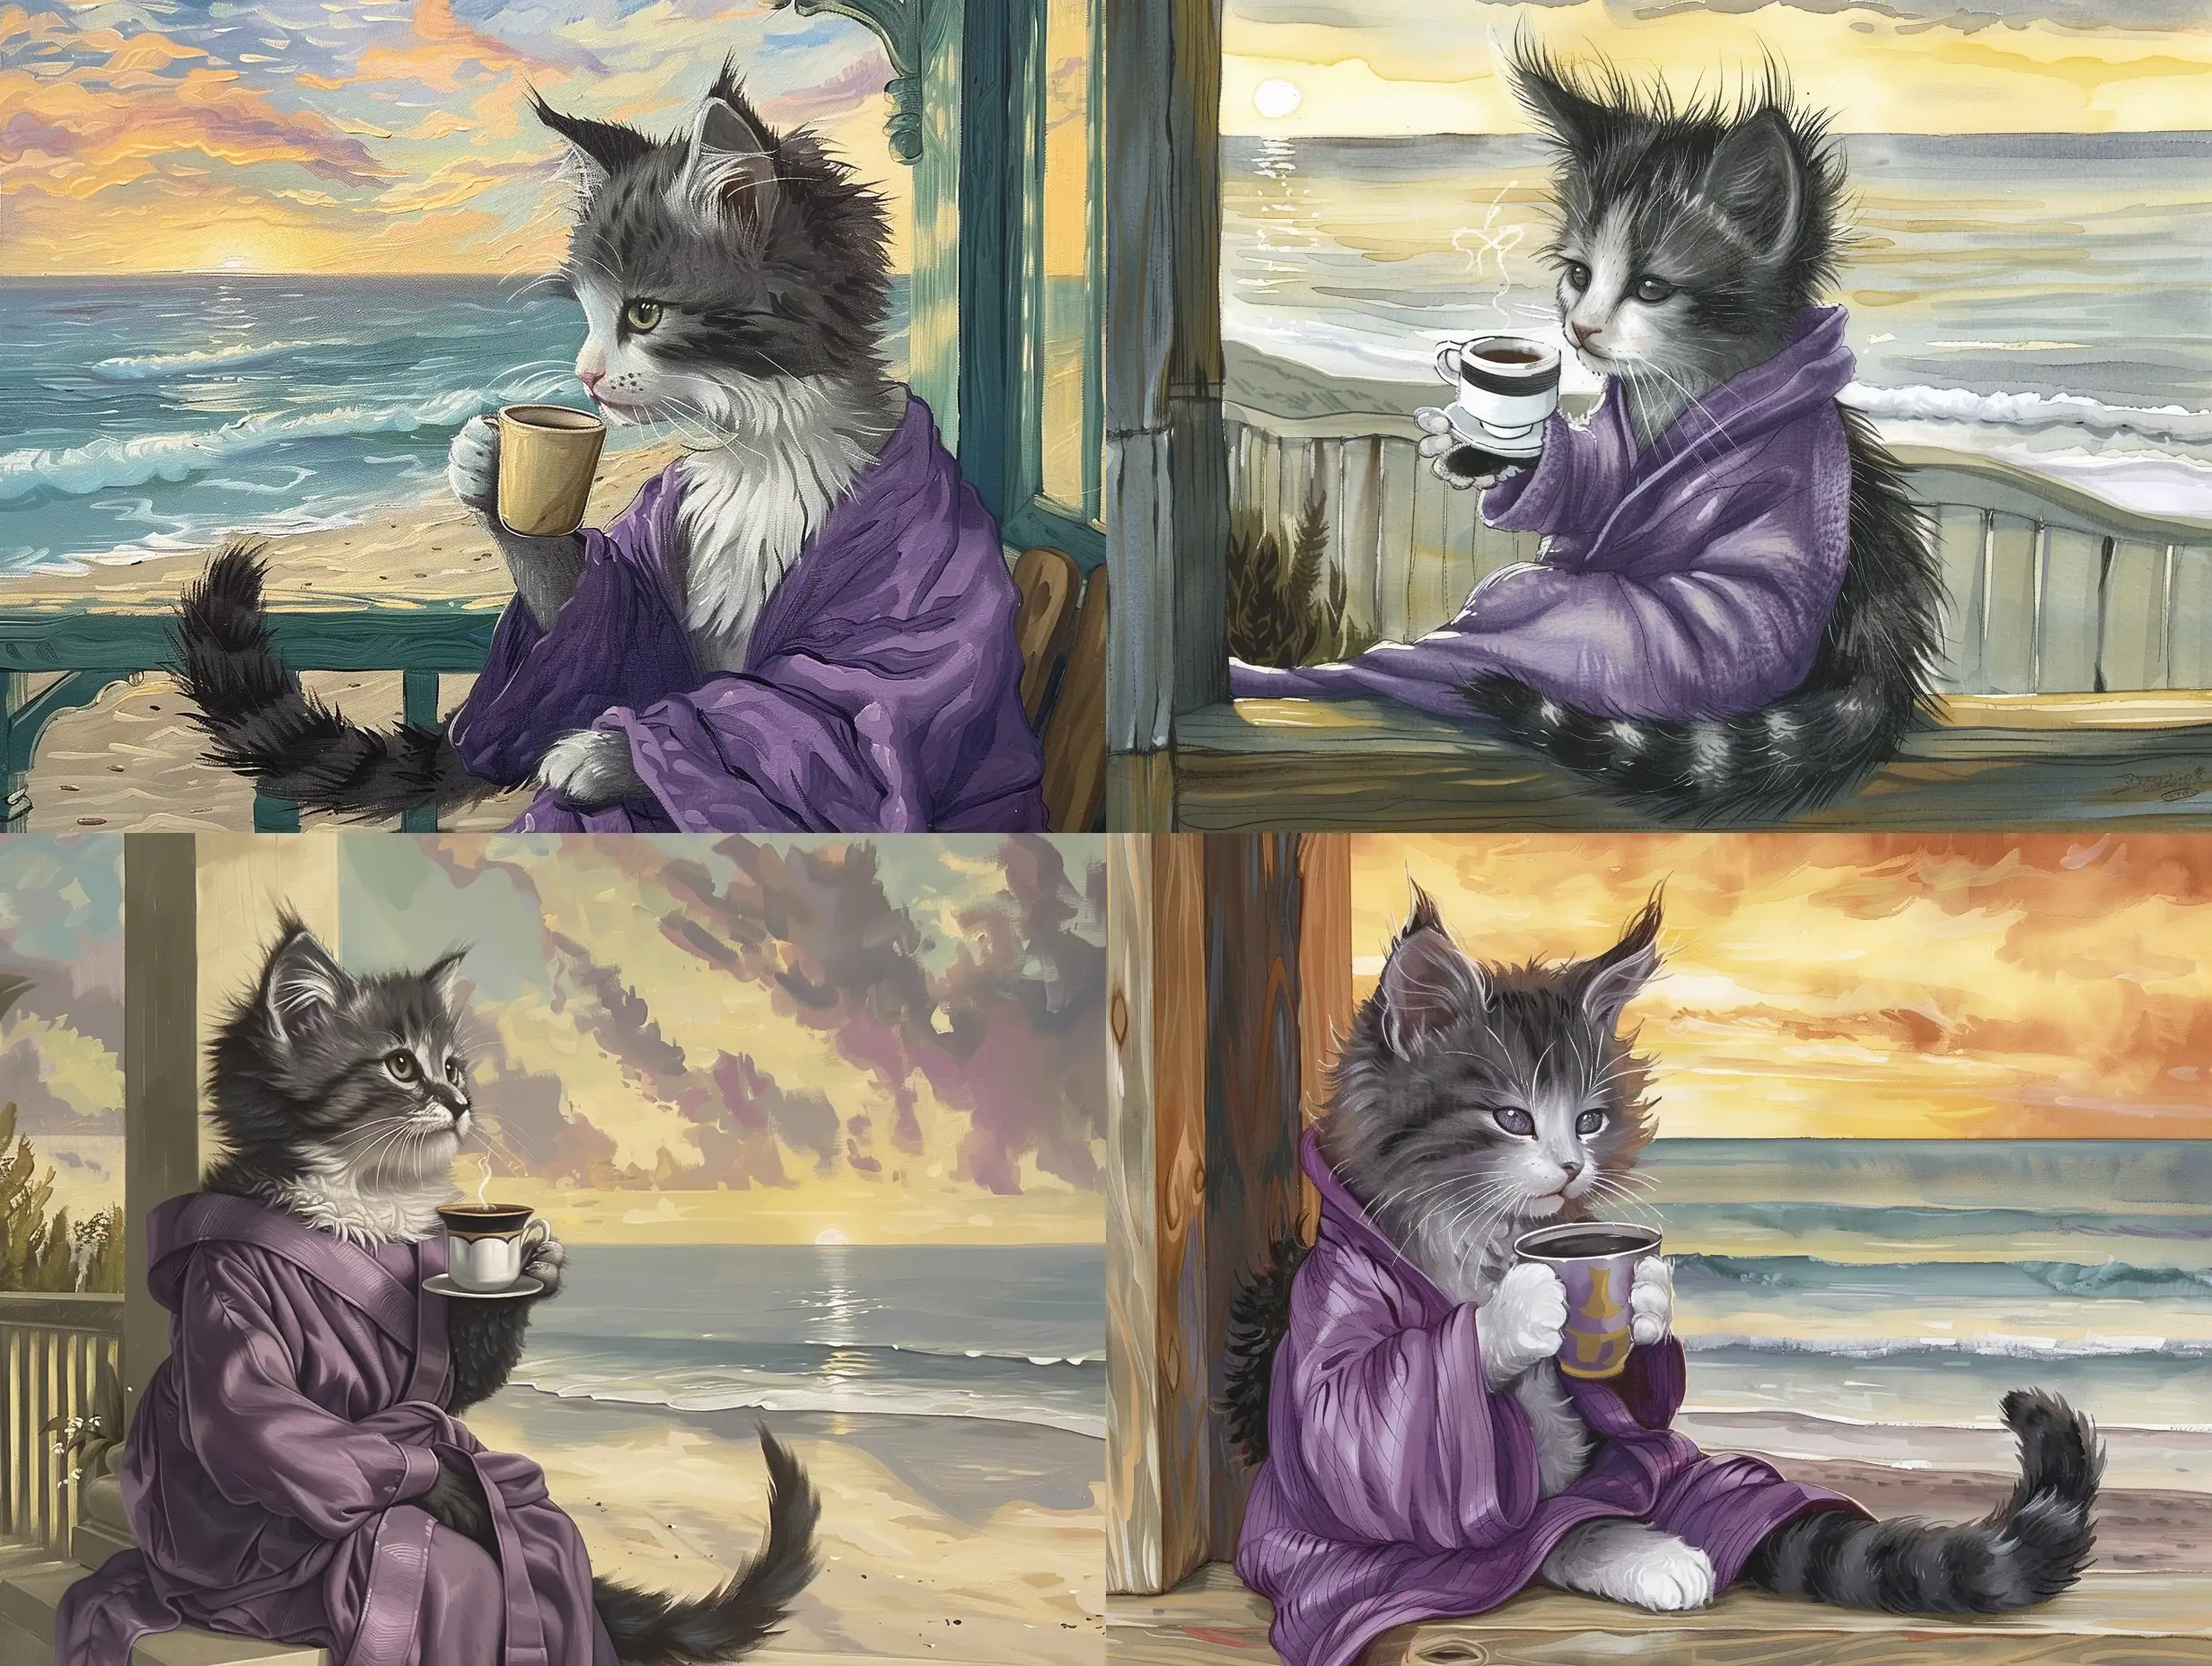 Grey and white Norwegian Forest cat kitten with dark grey ears and a black and grey striped tail. It is wearing a purple robe, sitting on a porch, sipping coffee, and watching the sunrise at the beach.  Style is Edgar Degas